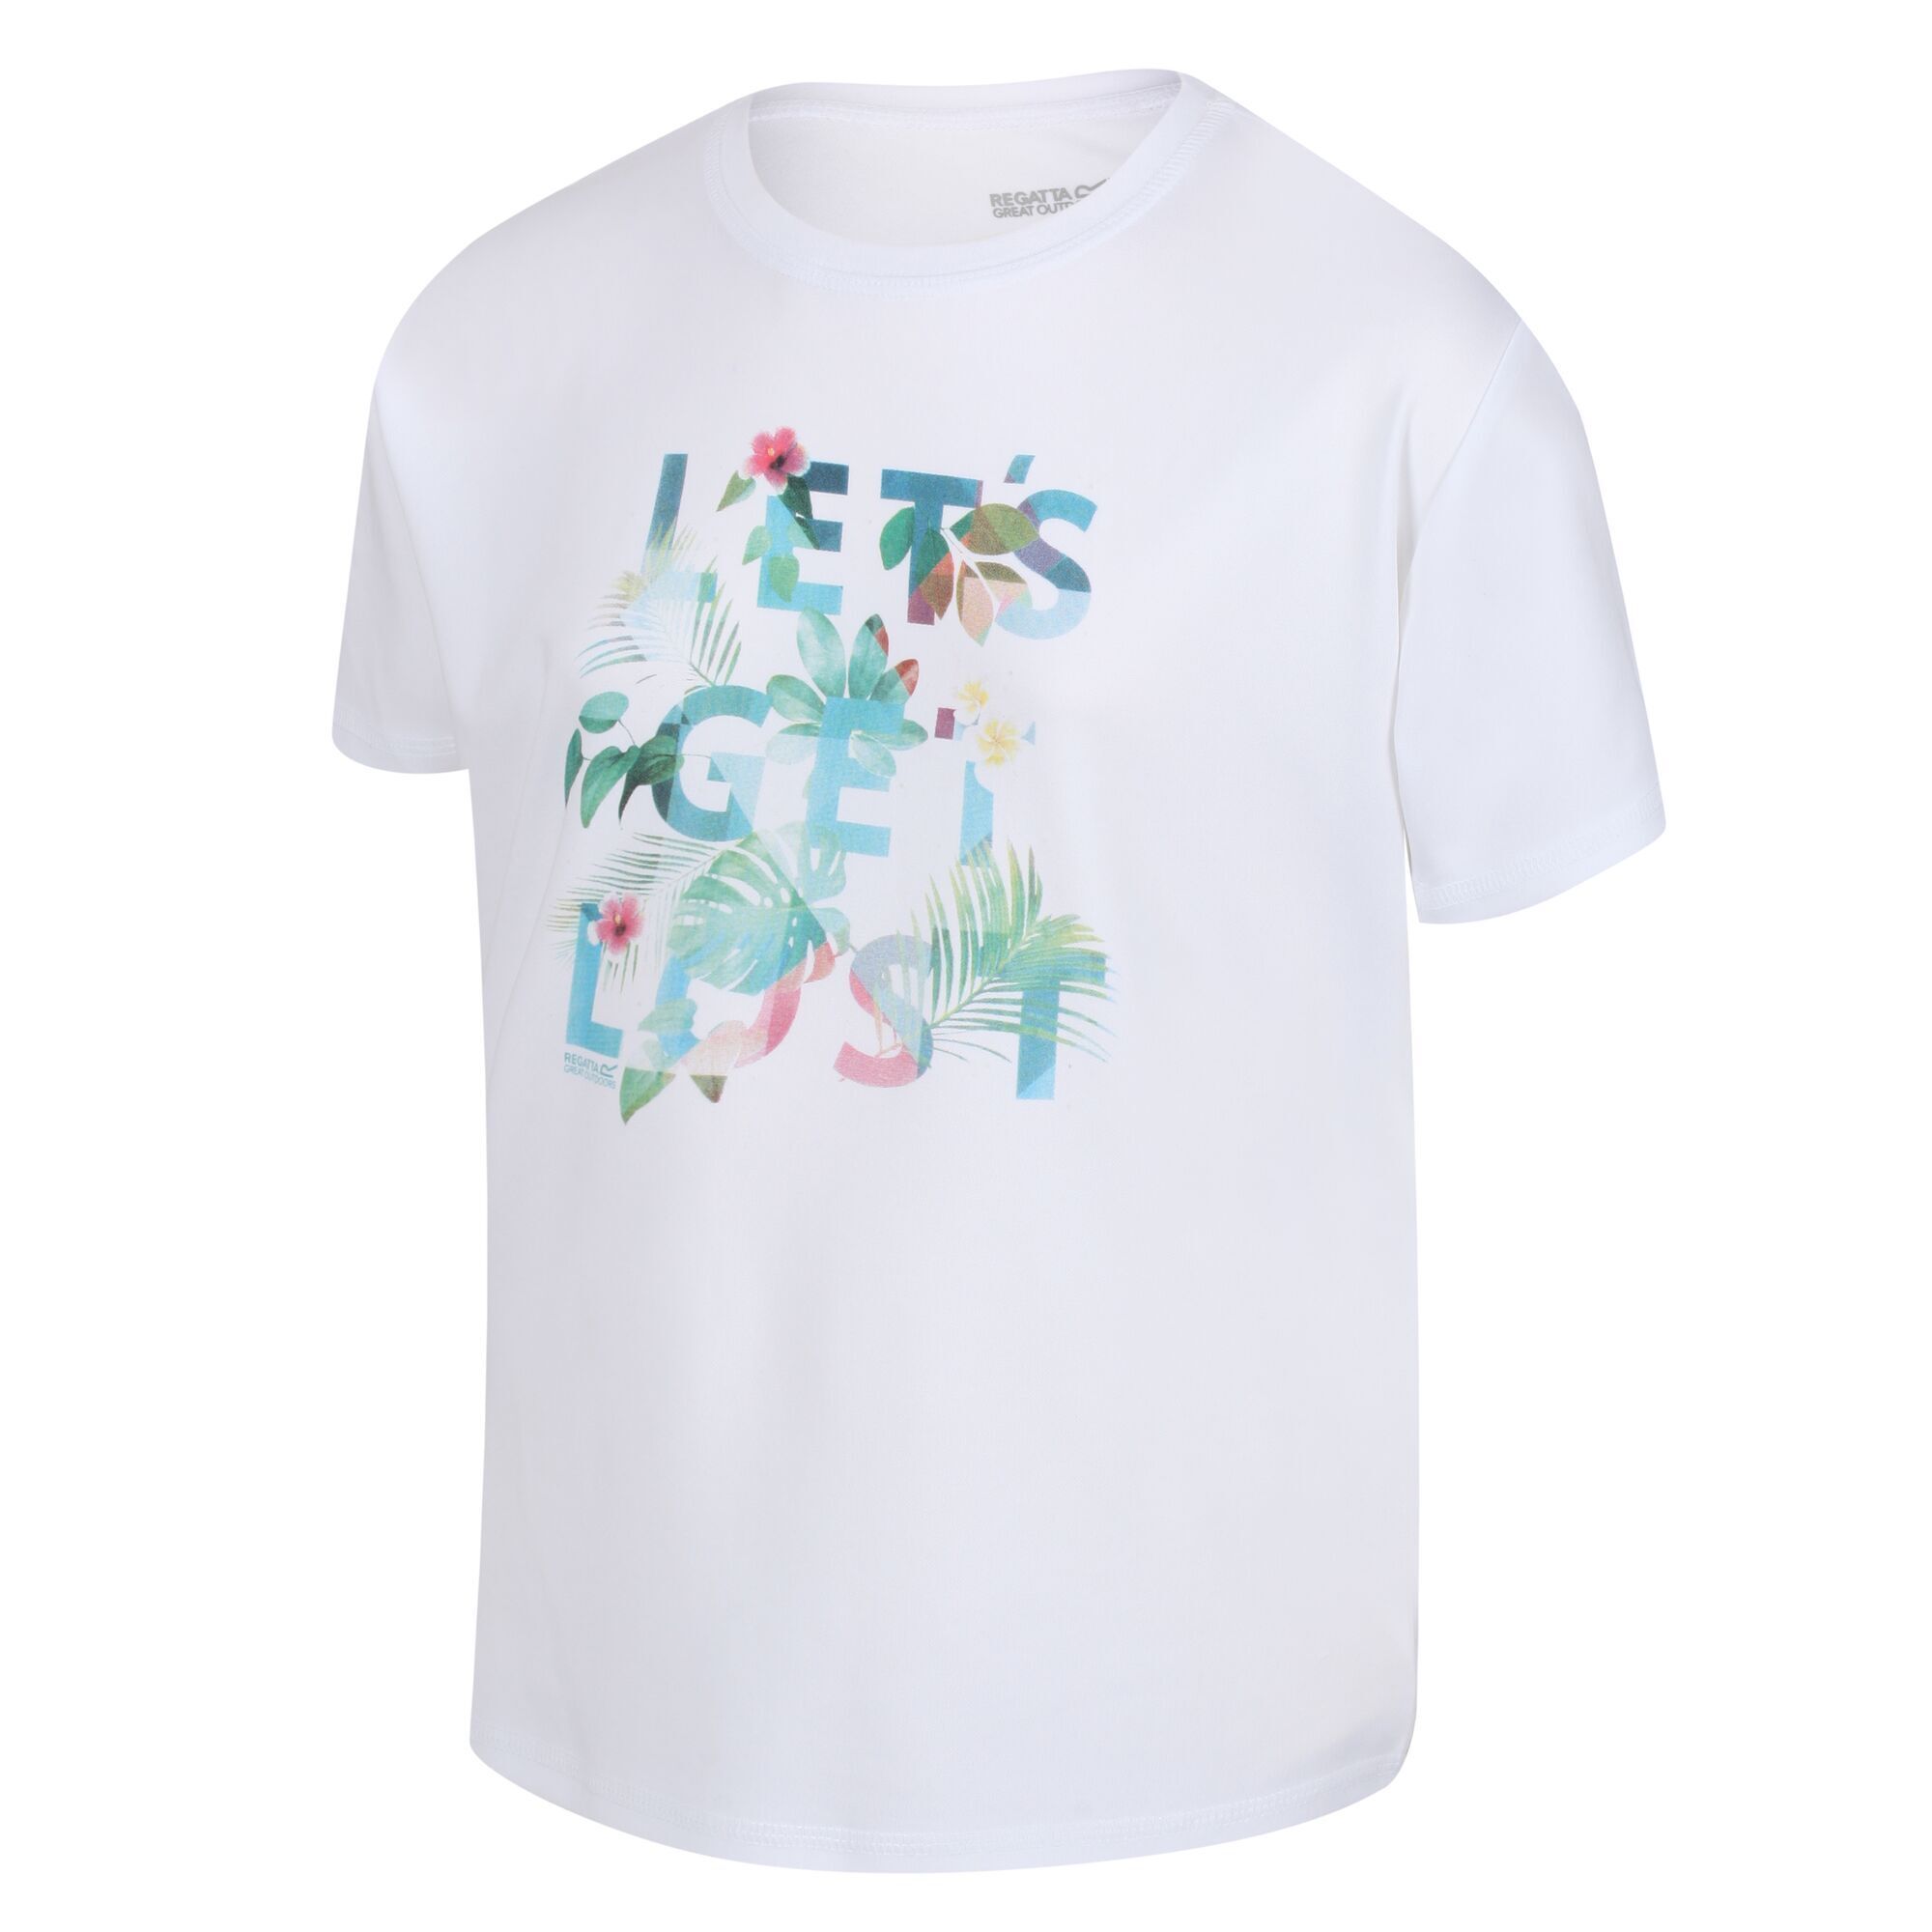 100% Polyester. Design: Flower, Leaves, Logo, Text. Neckline: Crew Neck. Sleeve-Type: Short-Sleeved. Fabric Technology: Lightweight, Moisture Wicking, Quick Dry. Sustainability: Made from Recycled Materials.